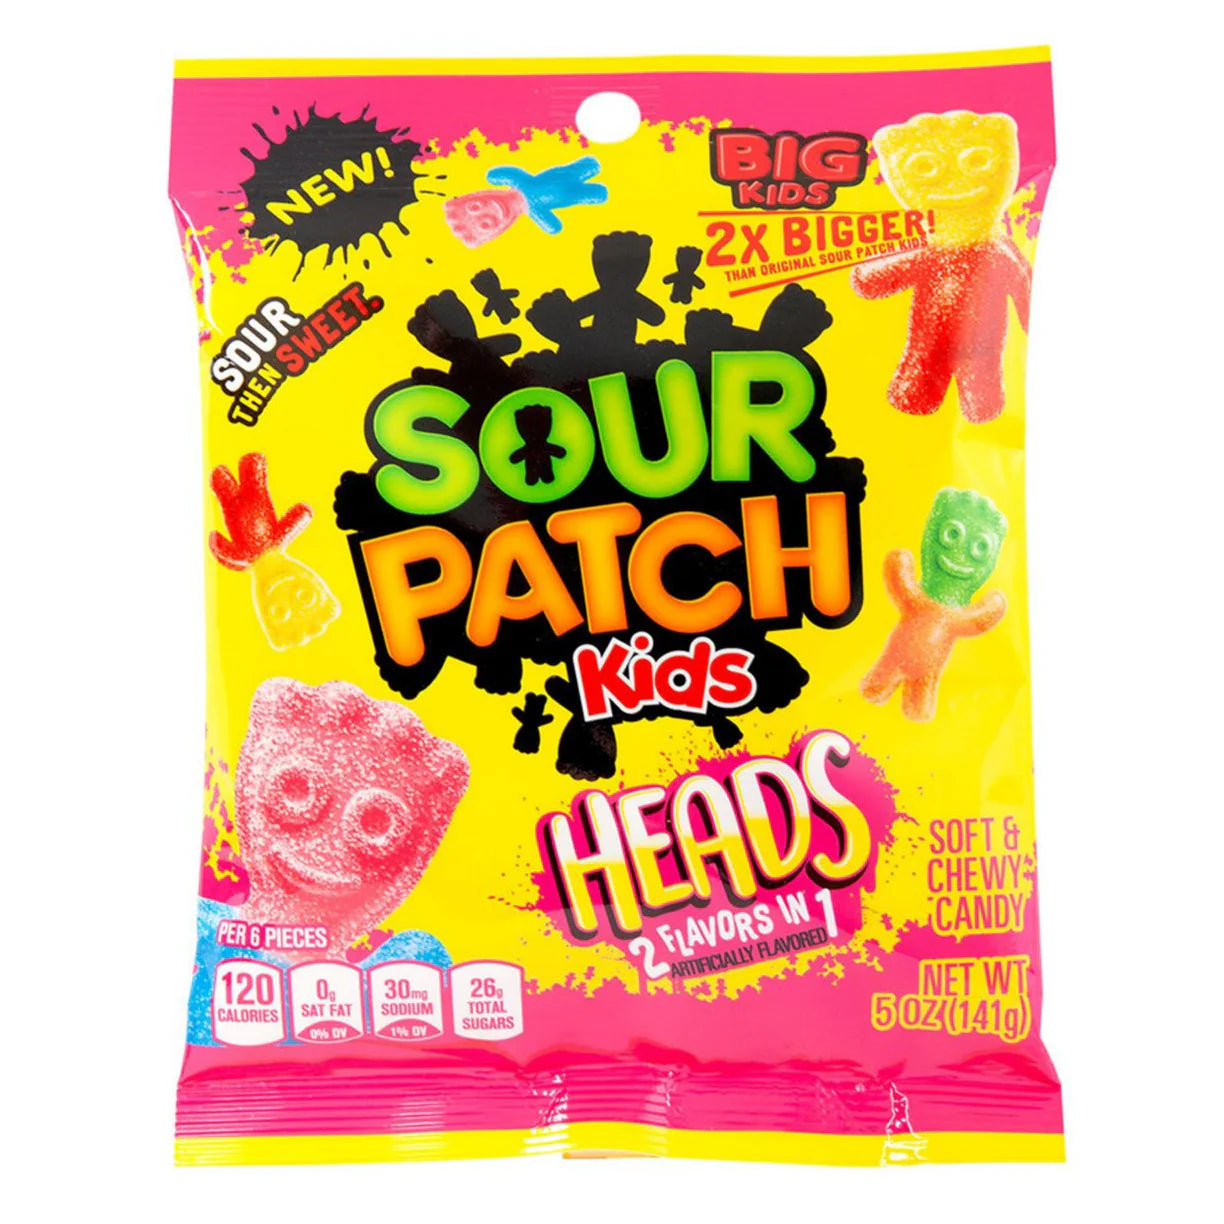 SOUR PATCH KIDS HEADS